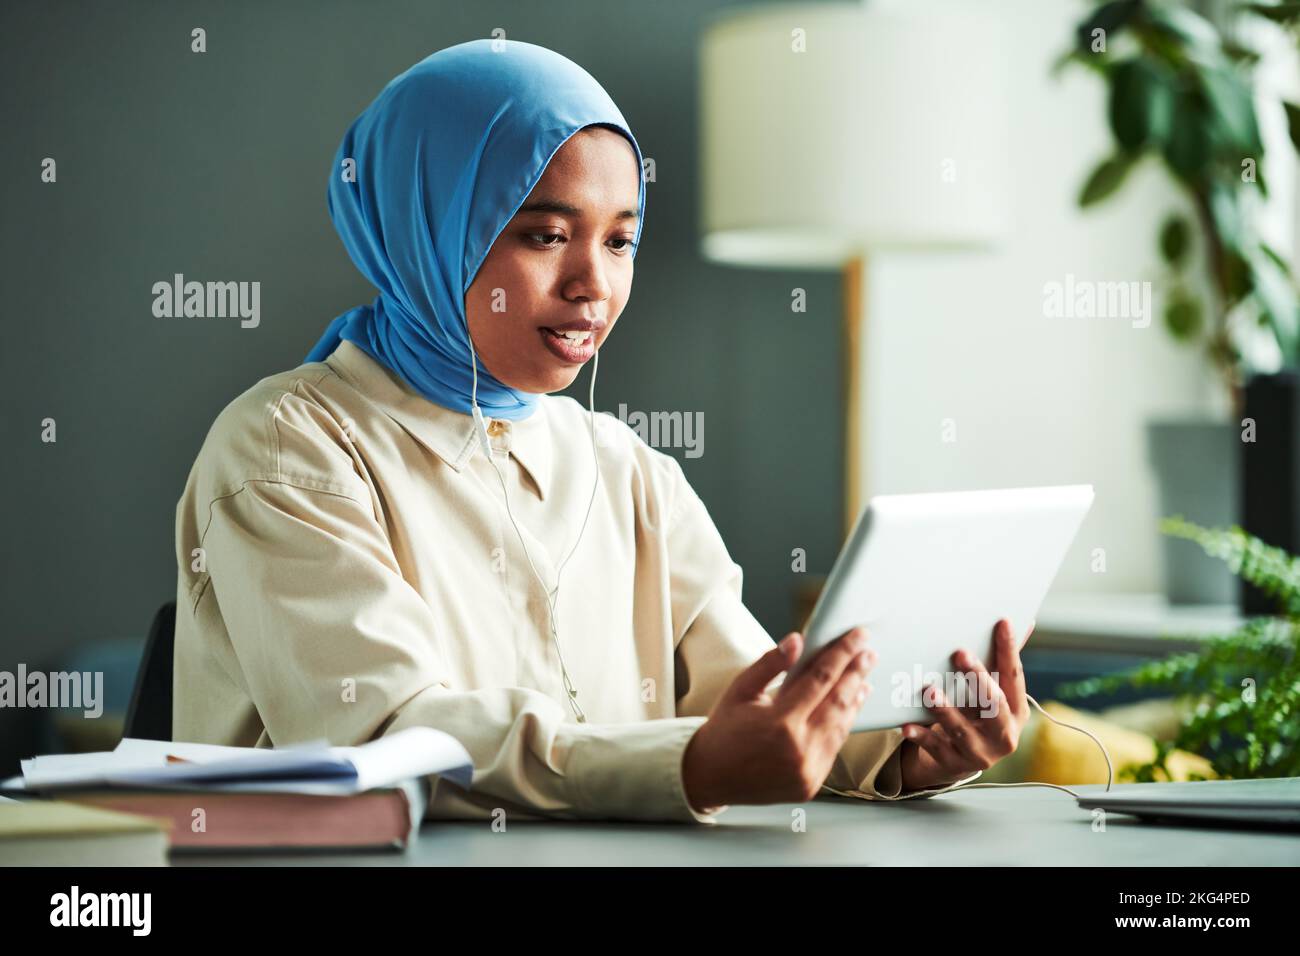 Confident Muslim female teacher or student in blue hijab looking at online audience on tablet screen while communicating to them Stock Photo